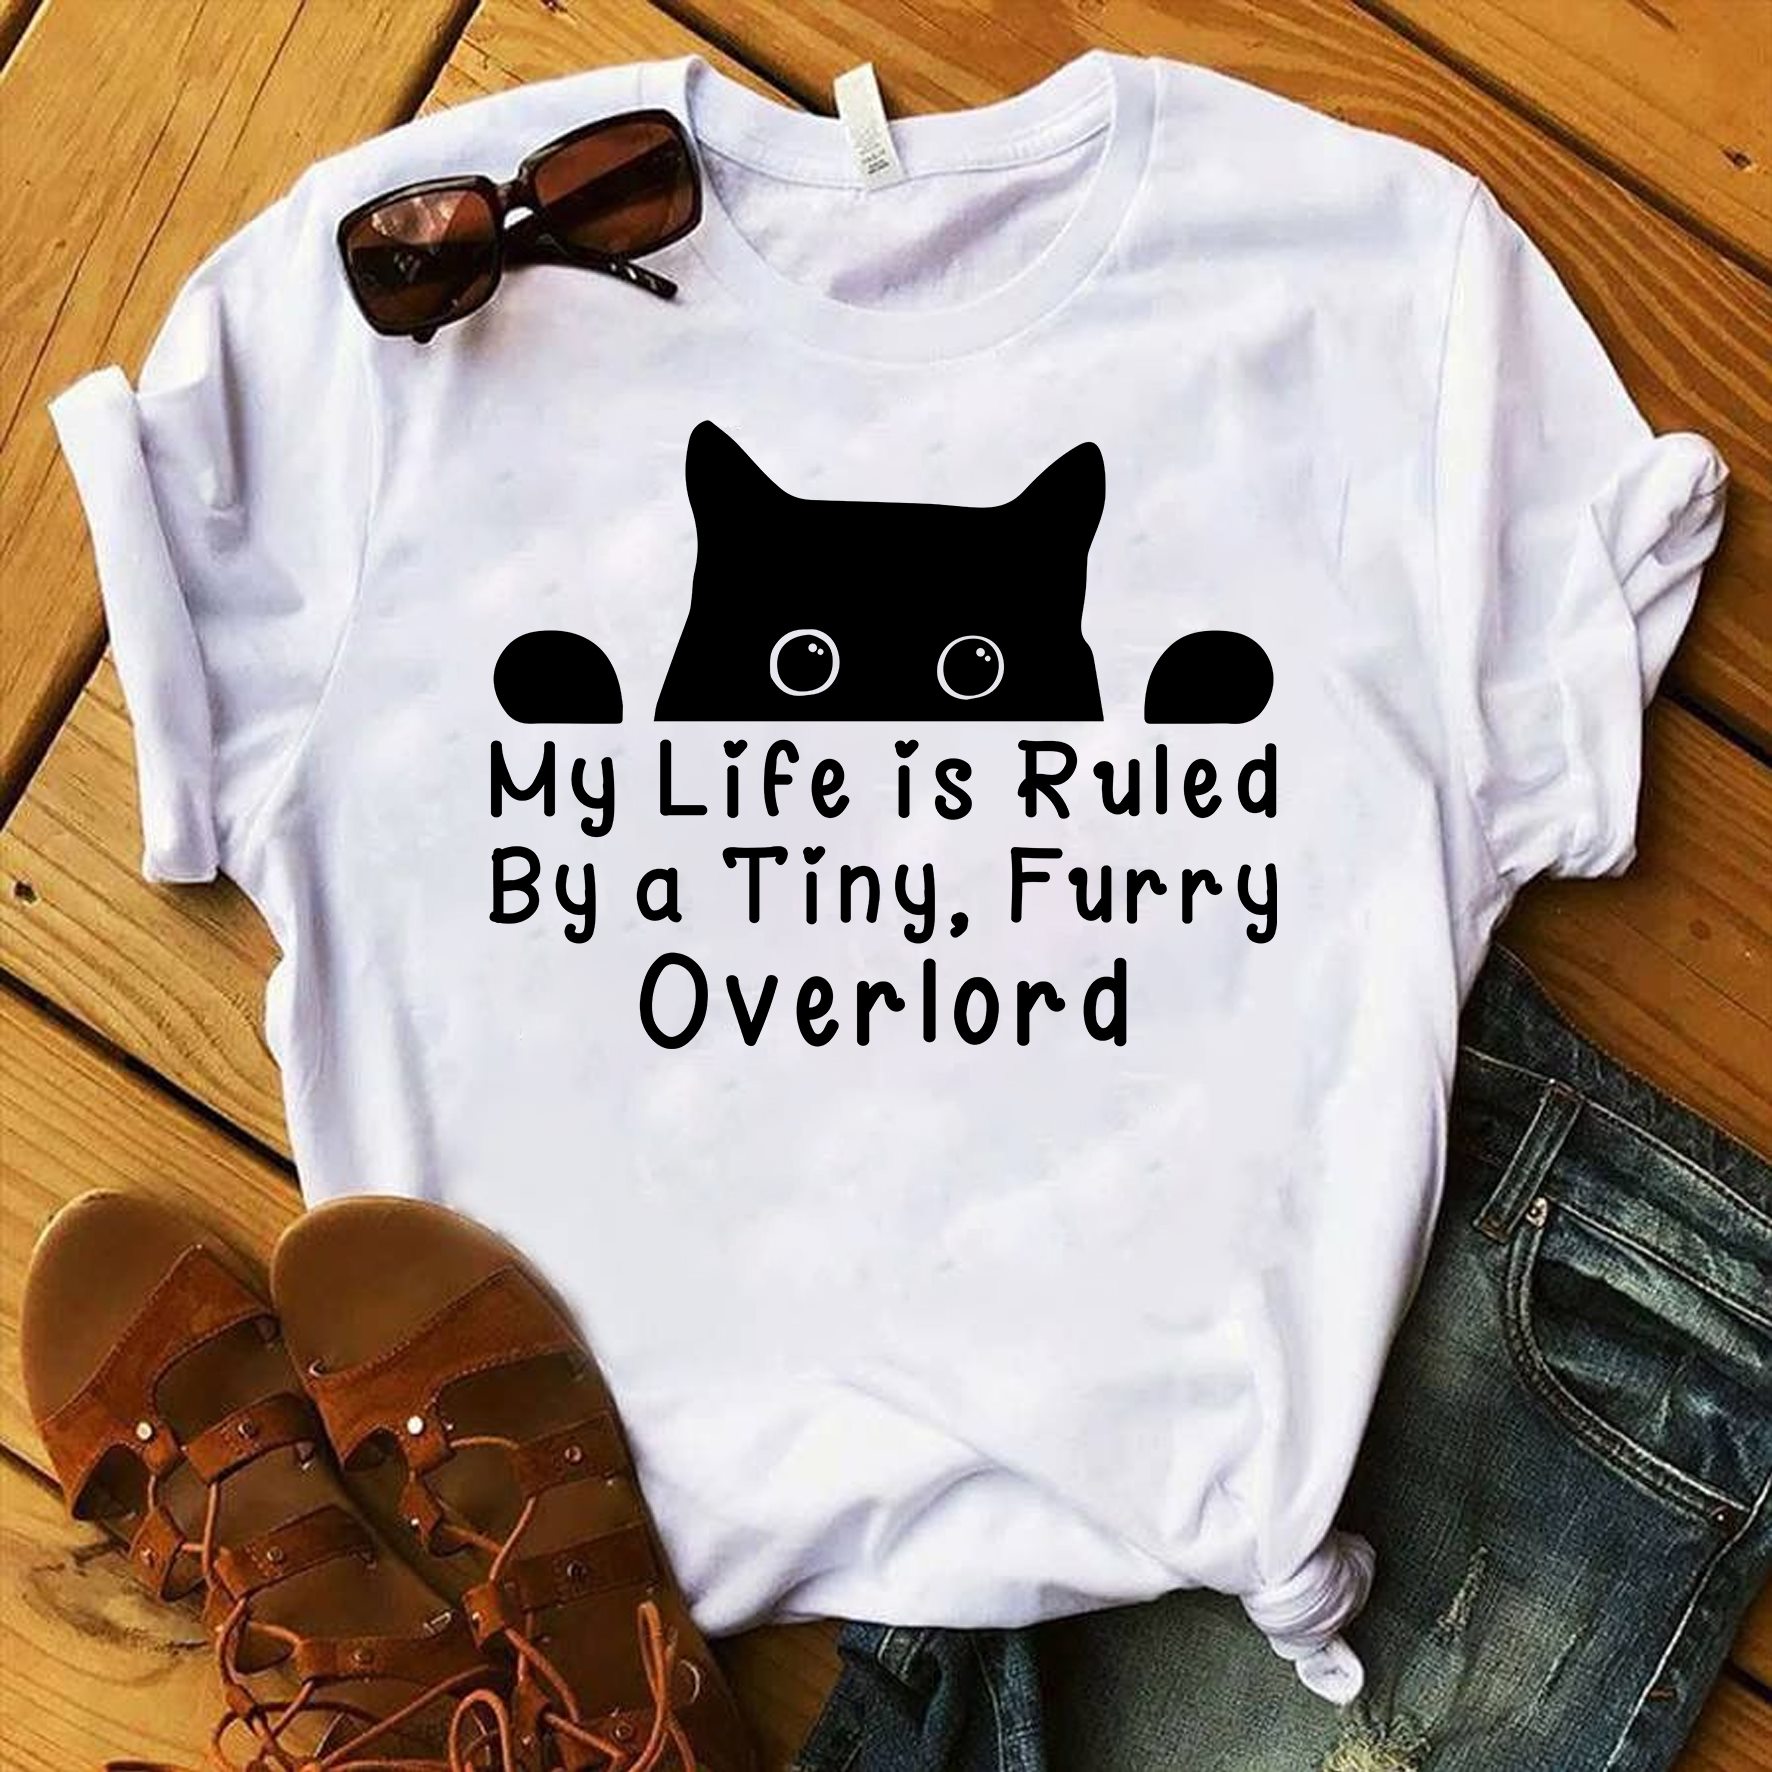 My life is ruled by a tiny furry overlord - Black cats